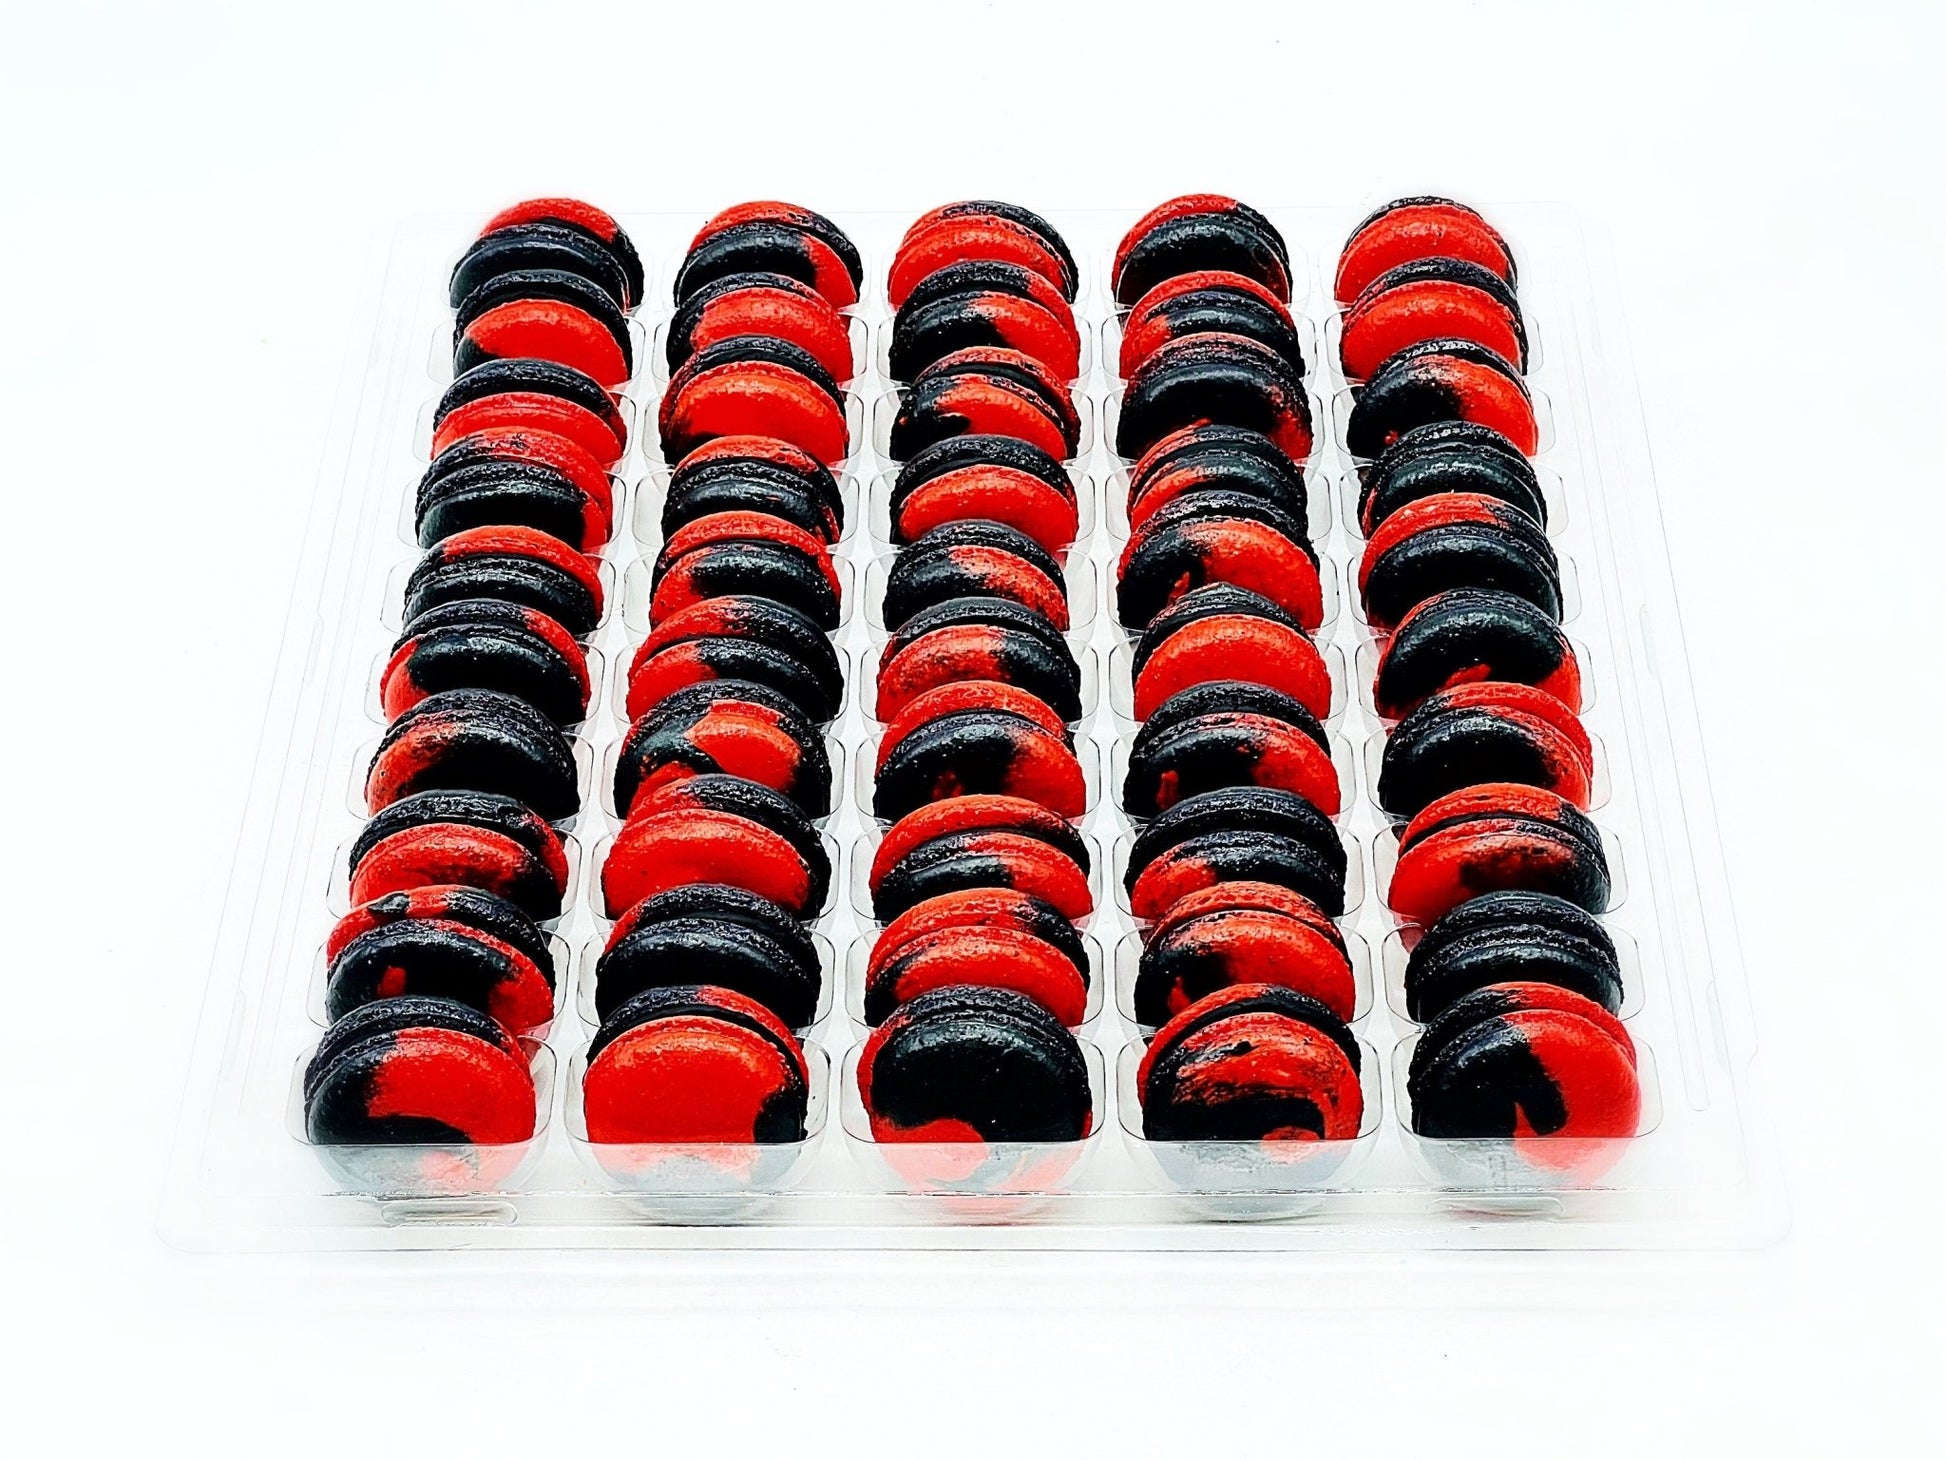 50 Pack Strawberry Licorice French Macaron Value Pack - Macaron Centrale